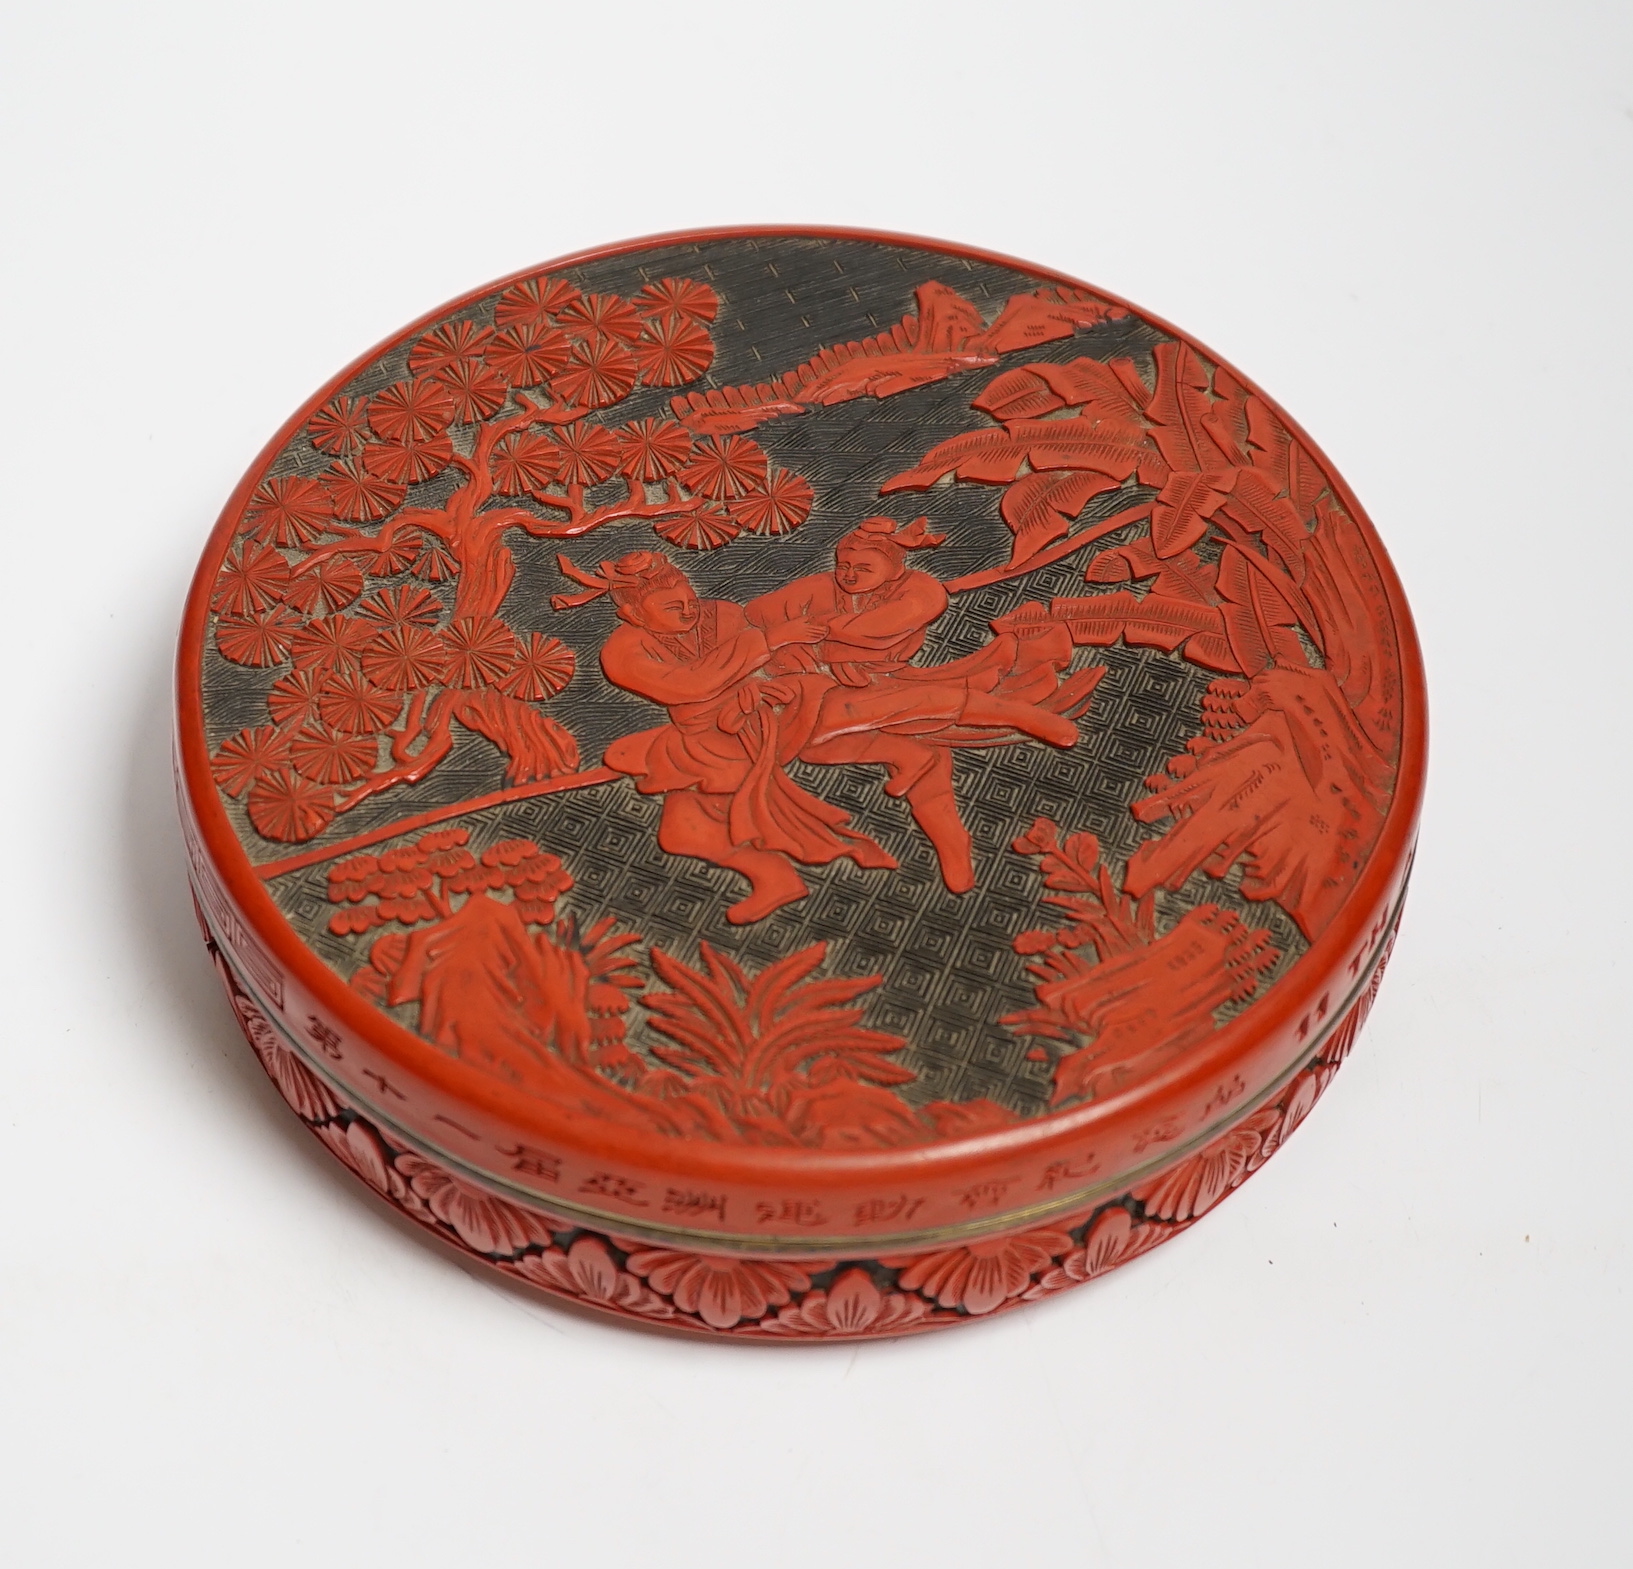 A Chinese cinnabar two colour lacquer box and cover, commemorating 11th Asian Games, Beijing, 20.5cm diameter